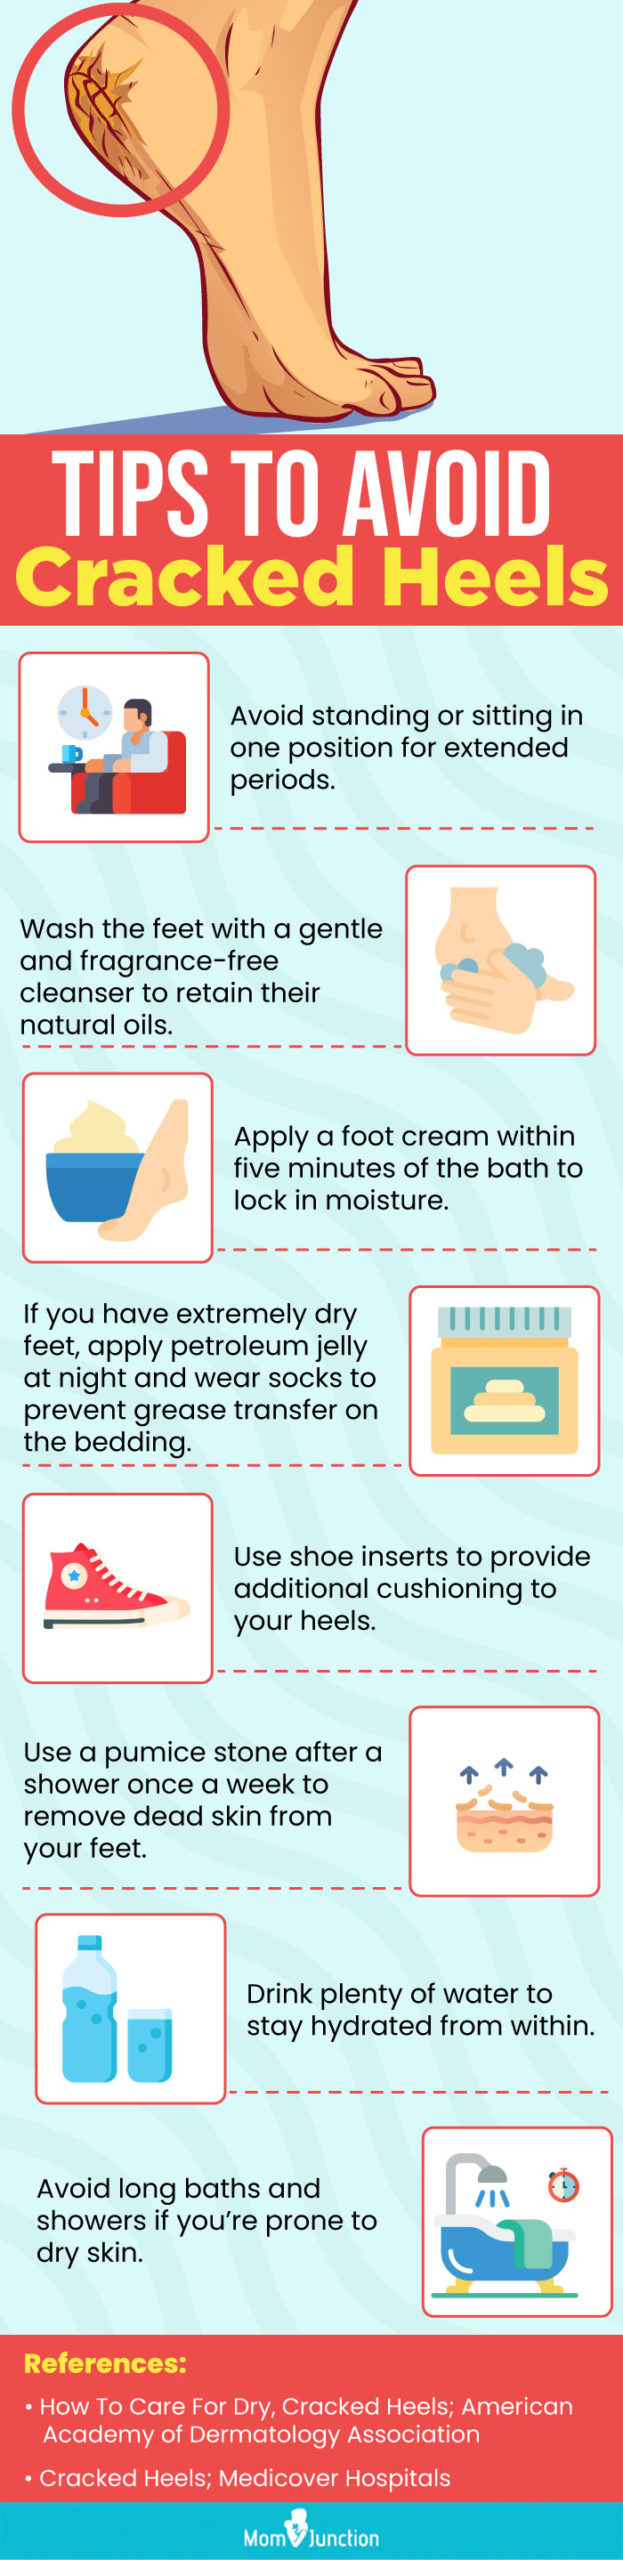 Tips To Avoid Cracked Heels (Infographic)